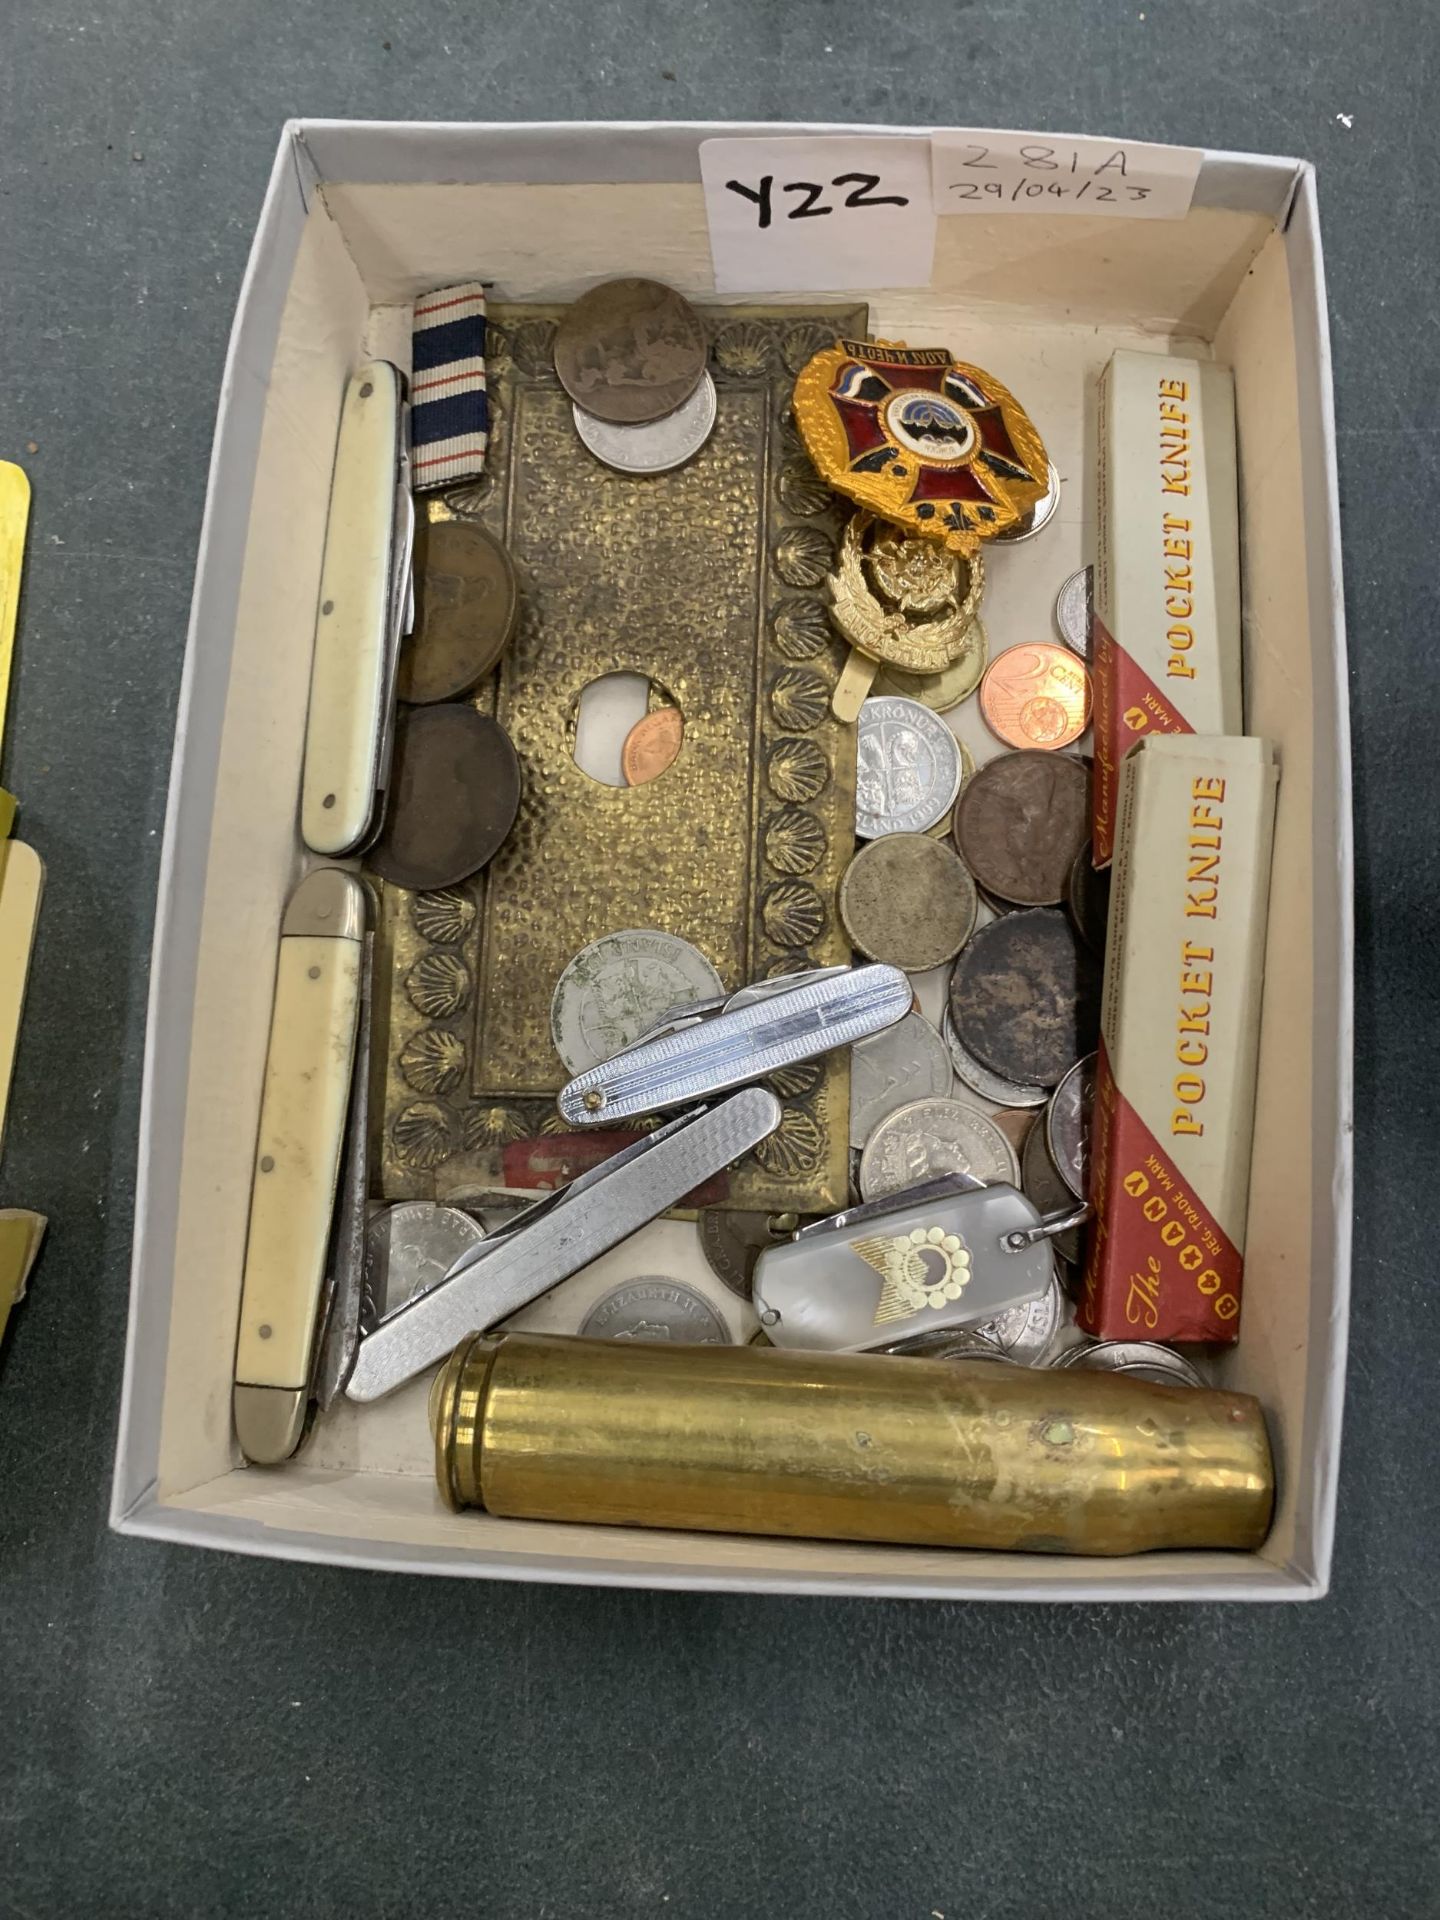 A MIXED GROUP OF VINTAGE ITEMS - PENKNIVES, COINS, BADGES ETC